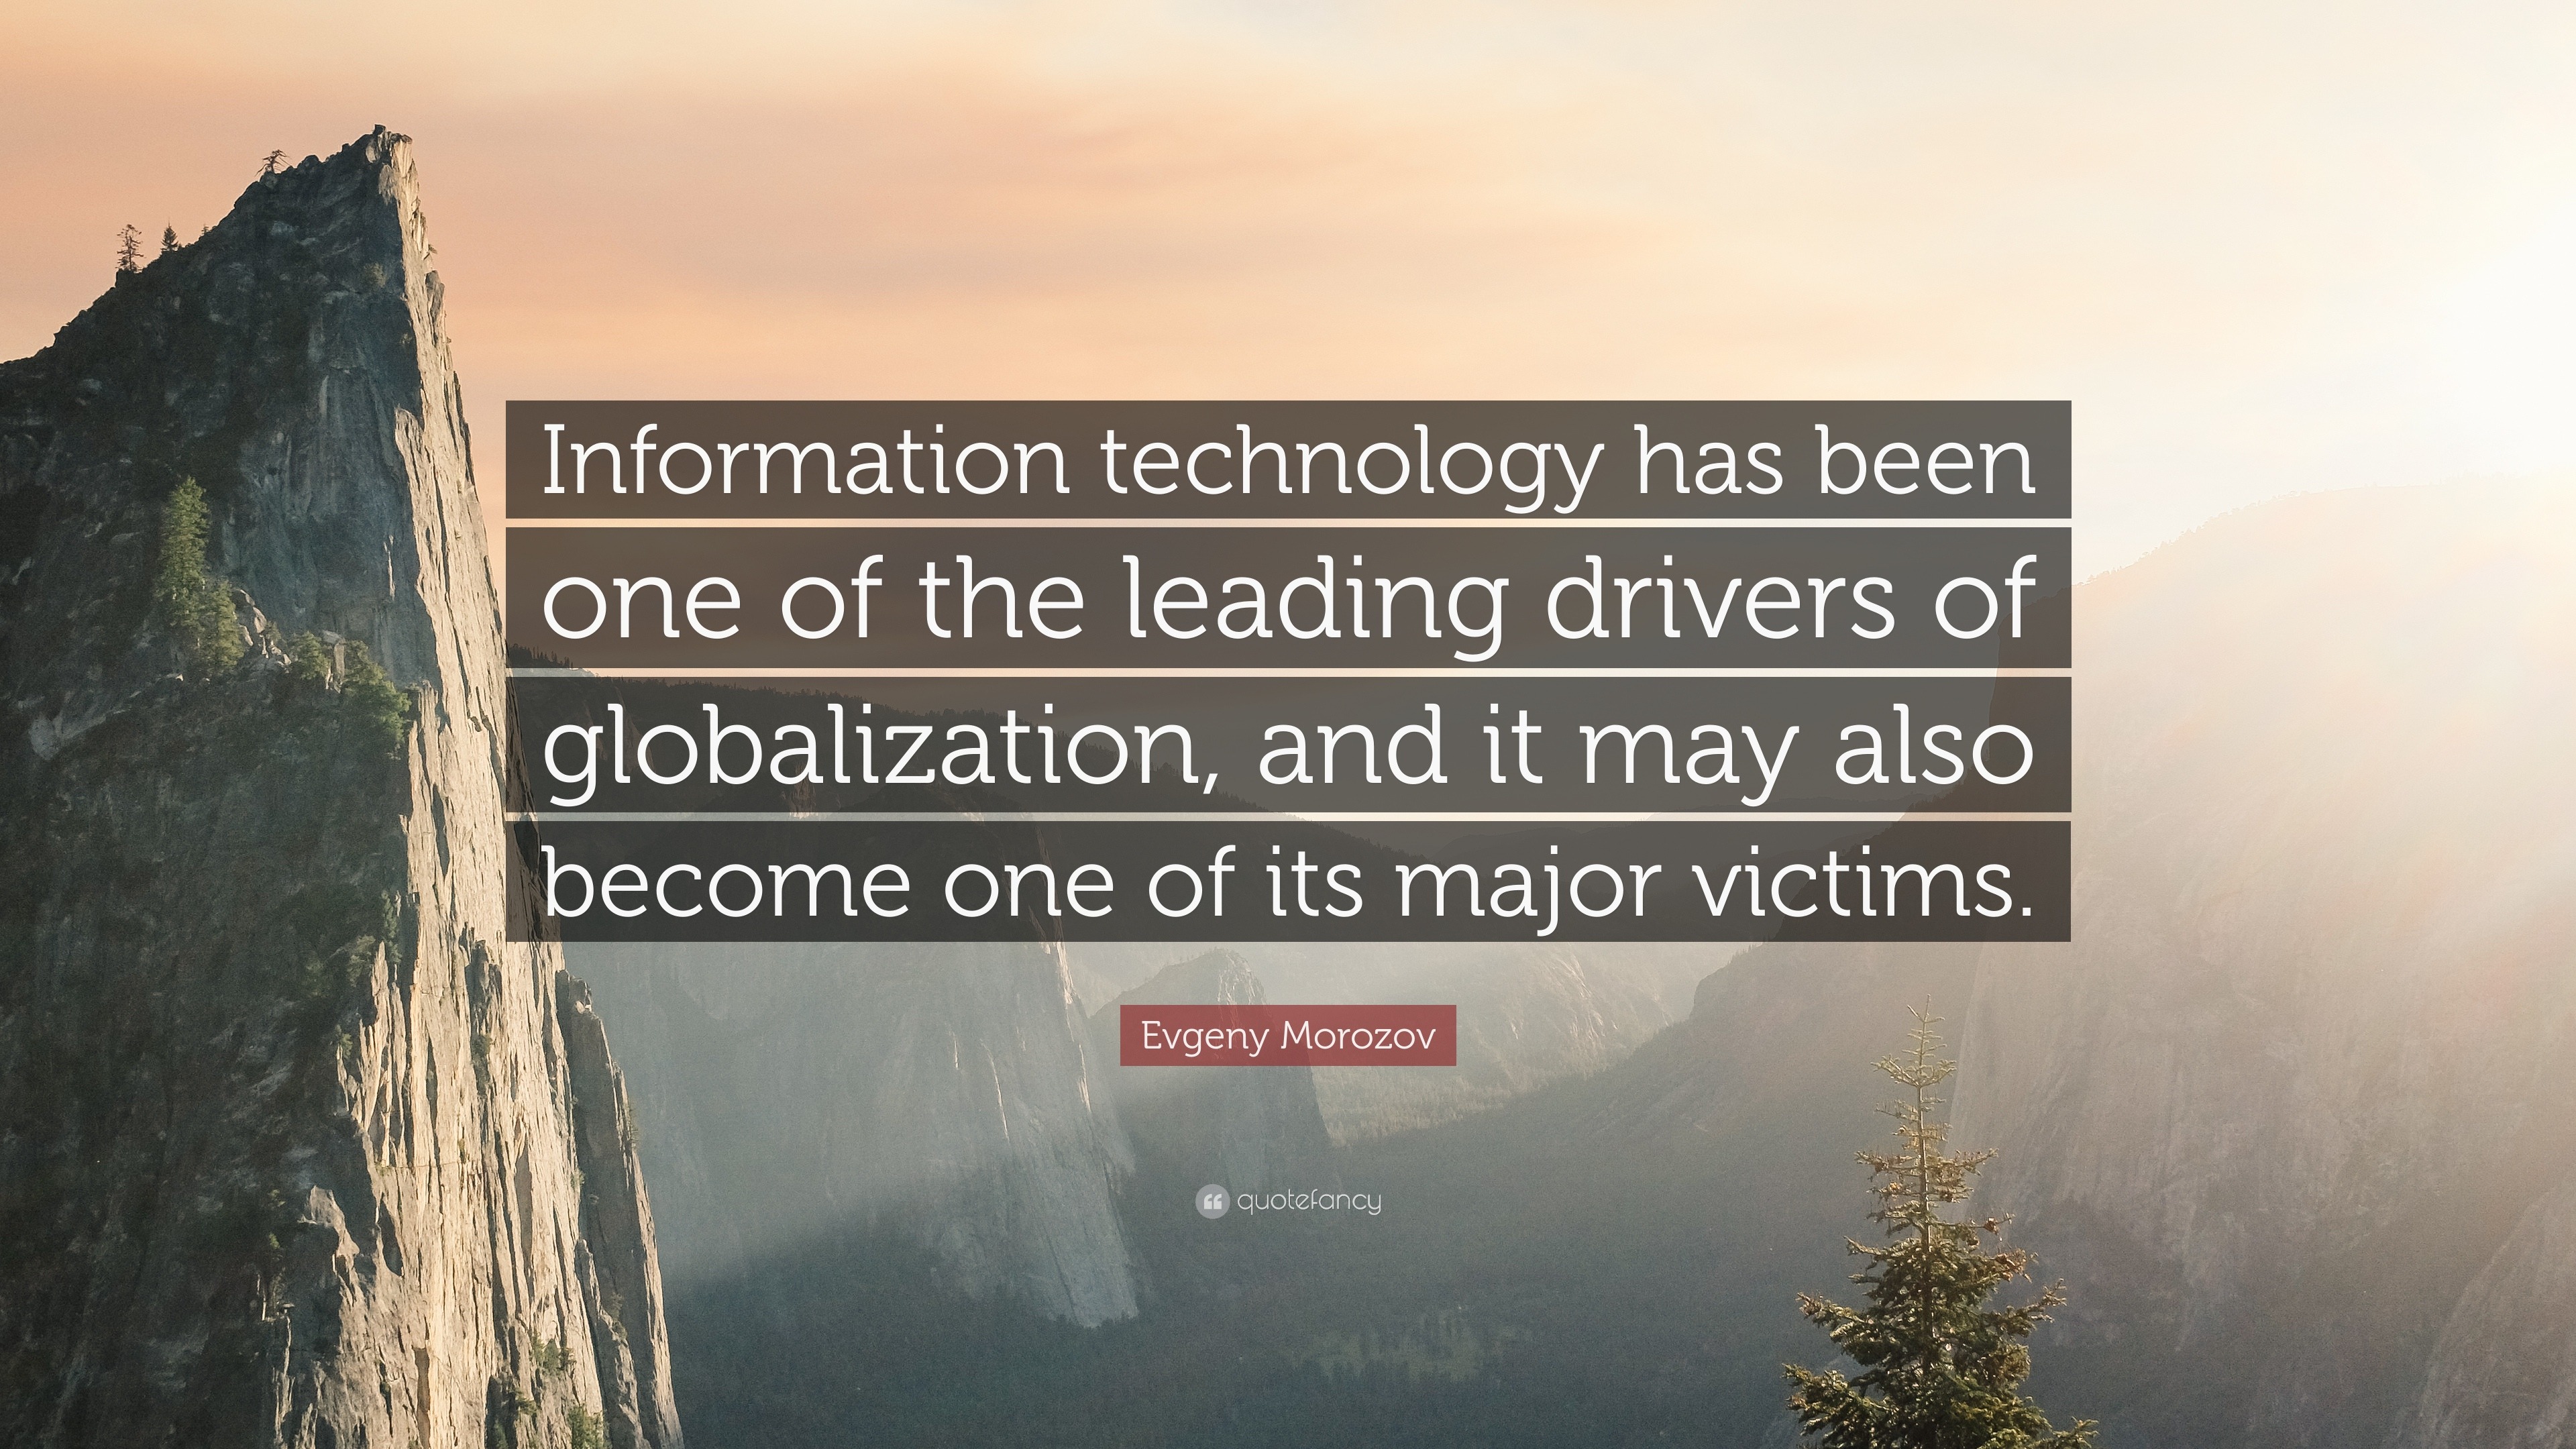 Evgeny Morozov Quote: “Information technology has been one of the